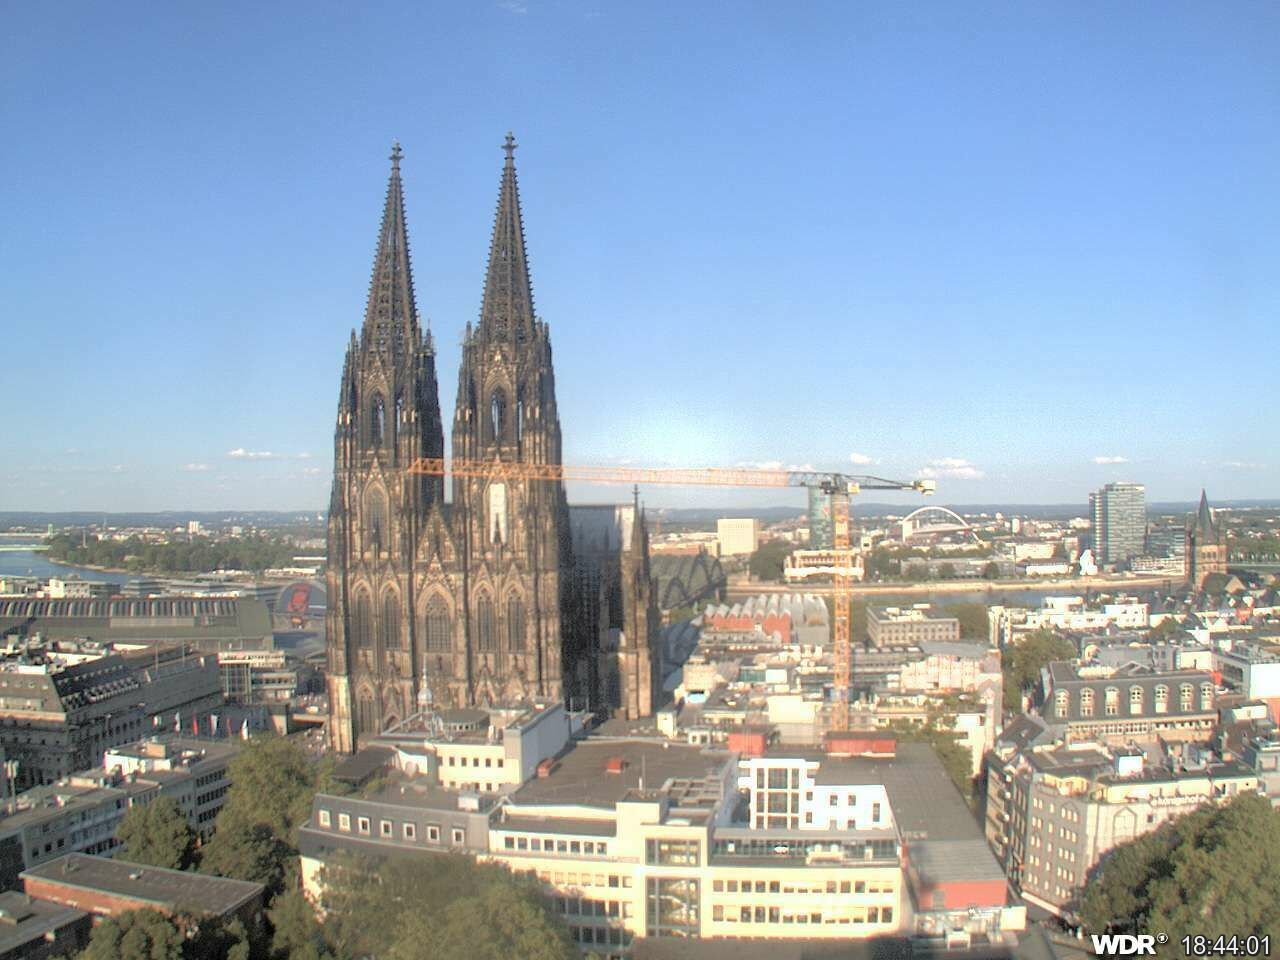 Cologne Wed. 18:45